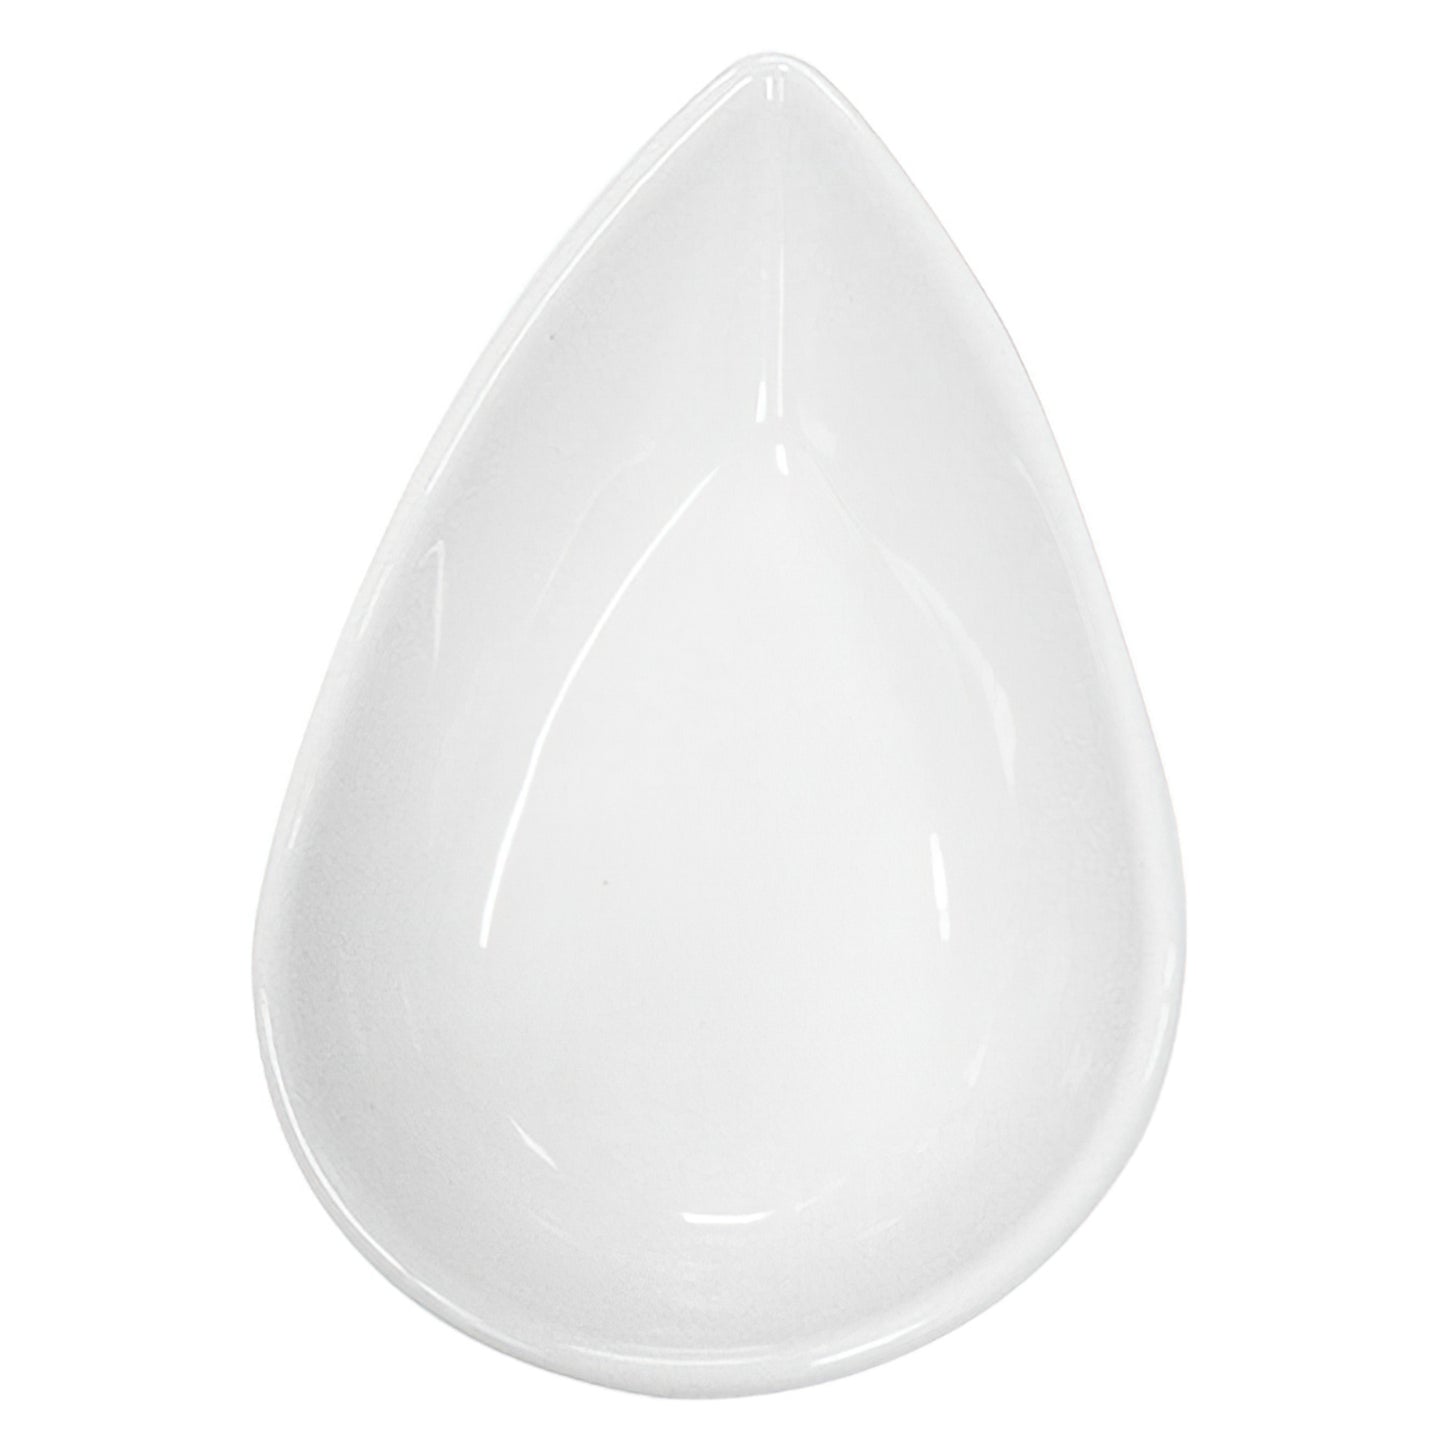 4 1/2" x  2 2/3" Bright White Porcelain Teardrop Plate, Corona Actualite (Stocked) (12 Pack)